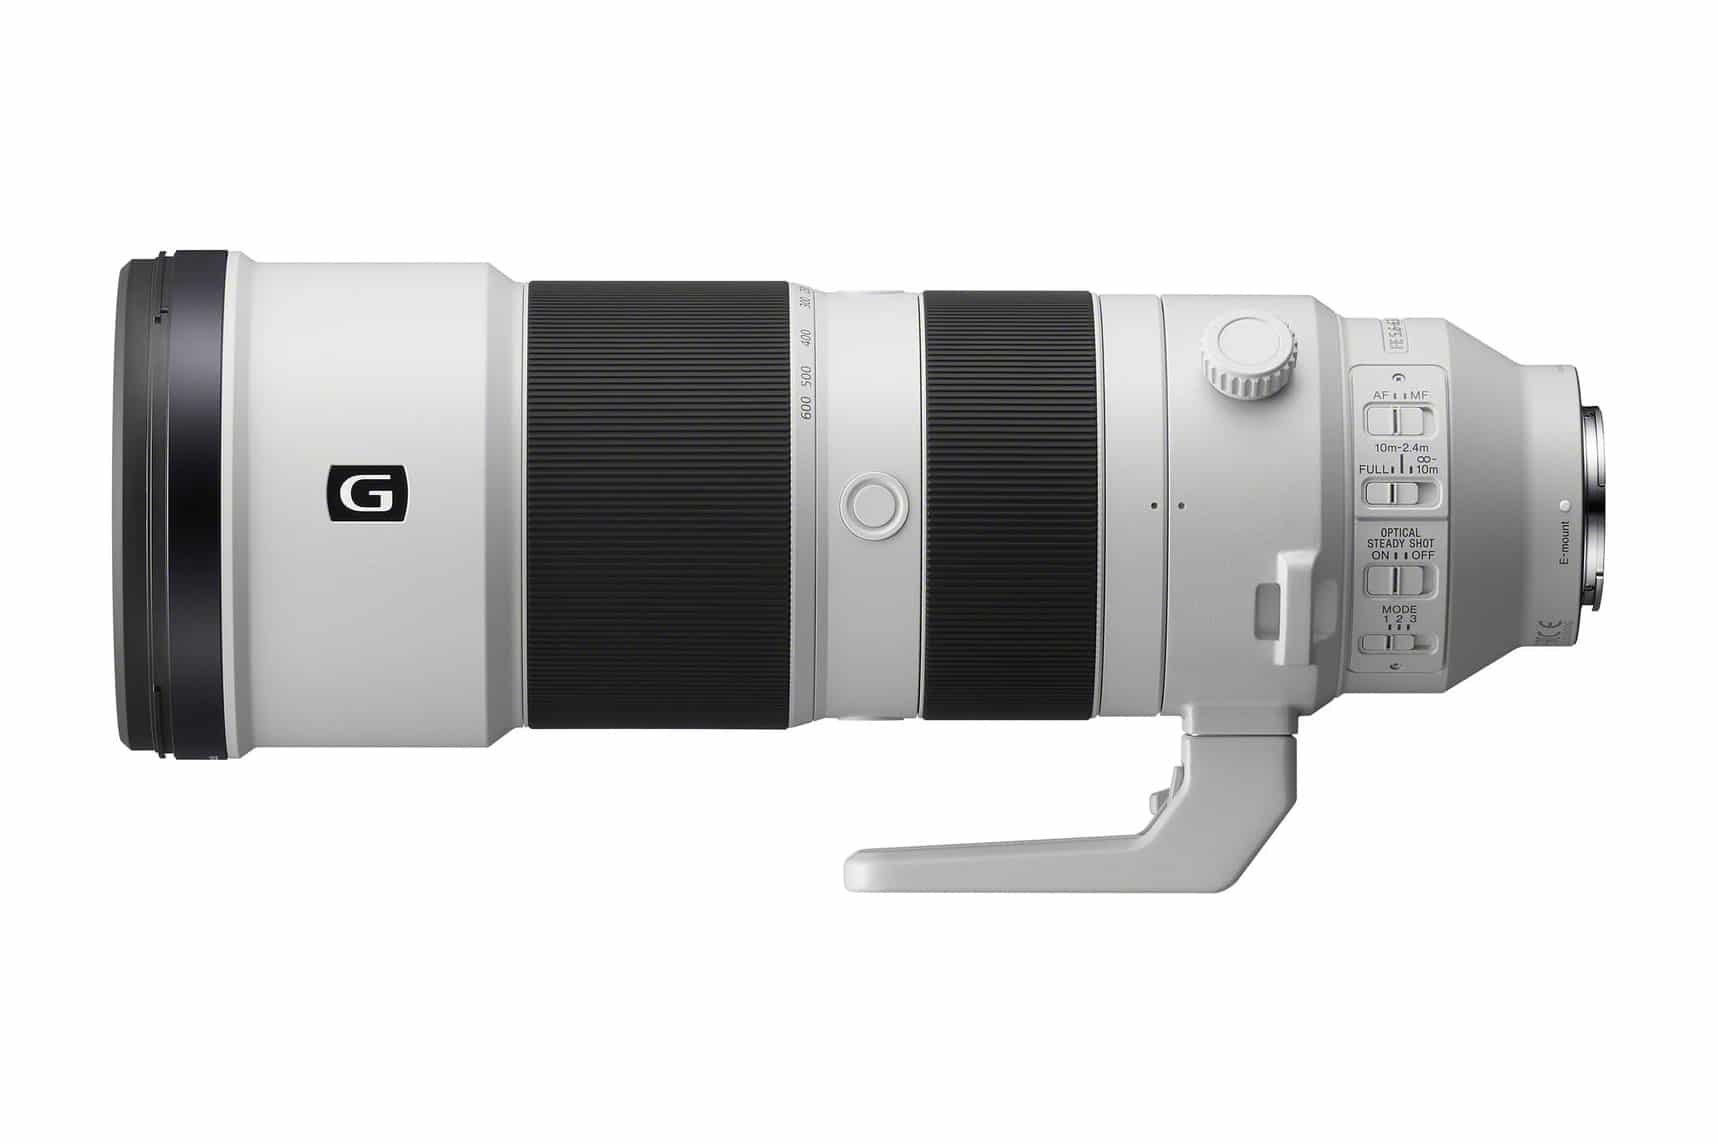 Sony 200-600mm f5.6-6.3 Review  The MUST HAVE Sony LENS for Wildlife &  Sports Photography 